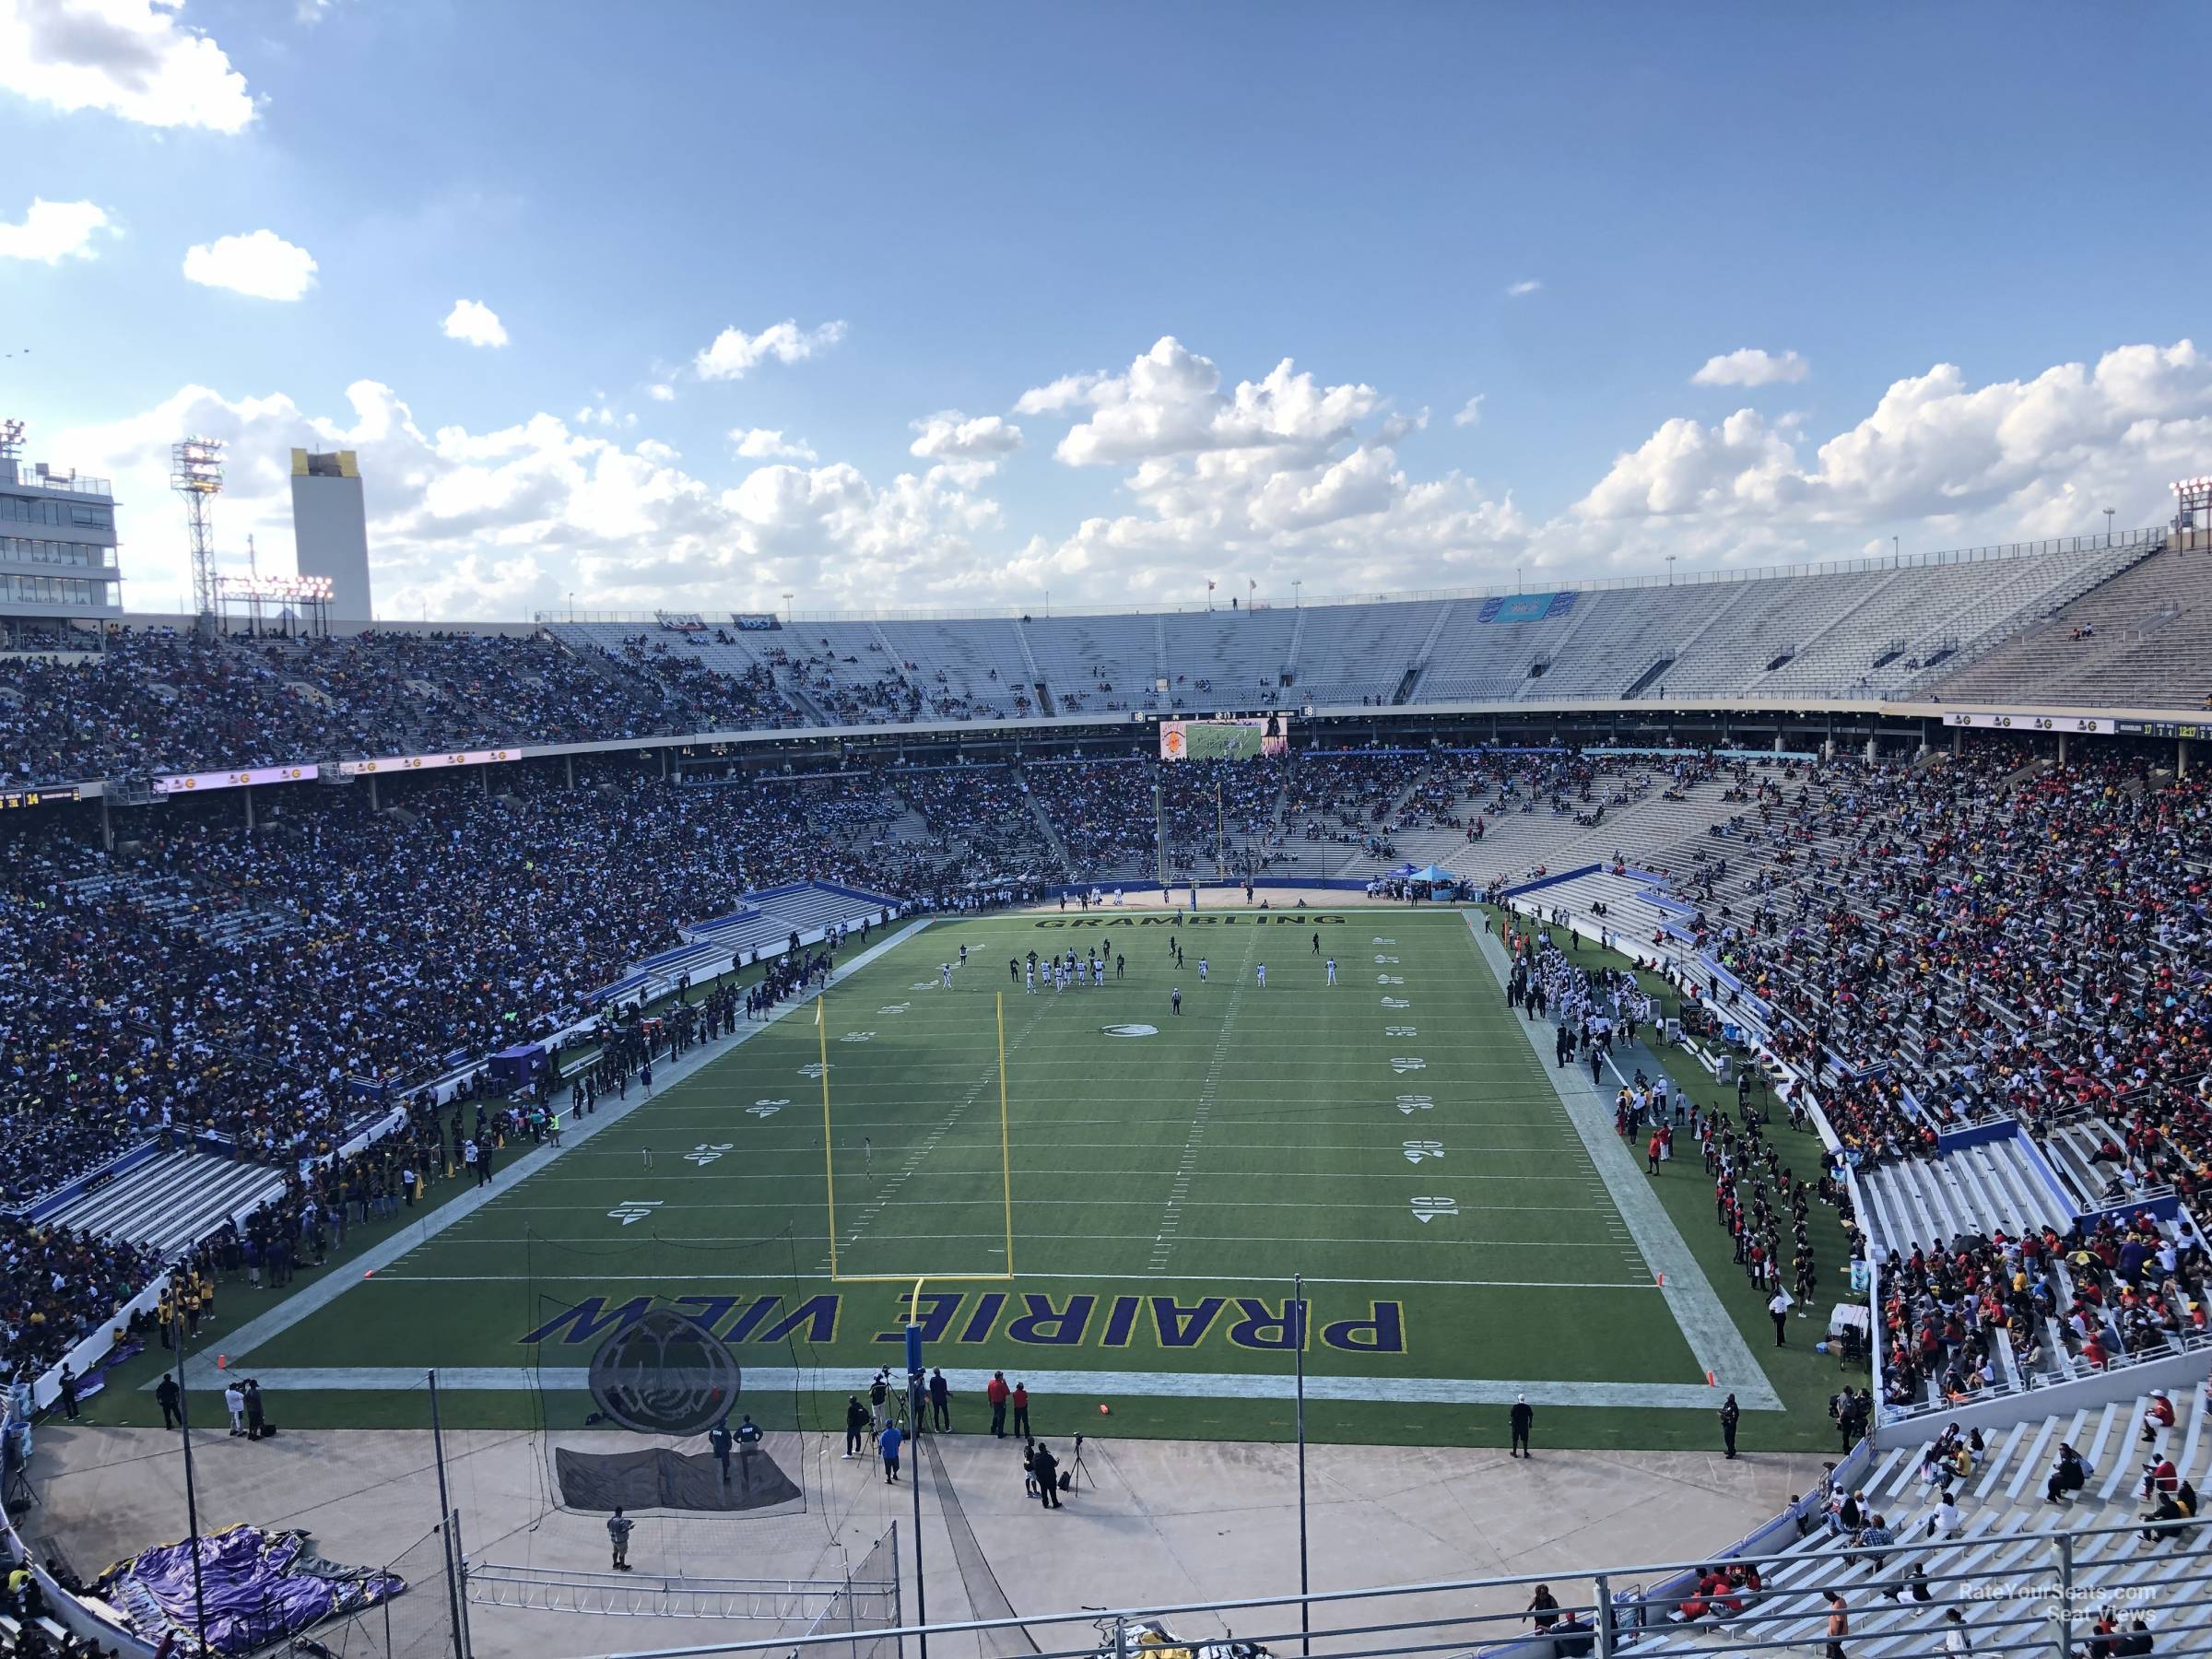 section 138, row 8 seat view  - cotton bowl